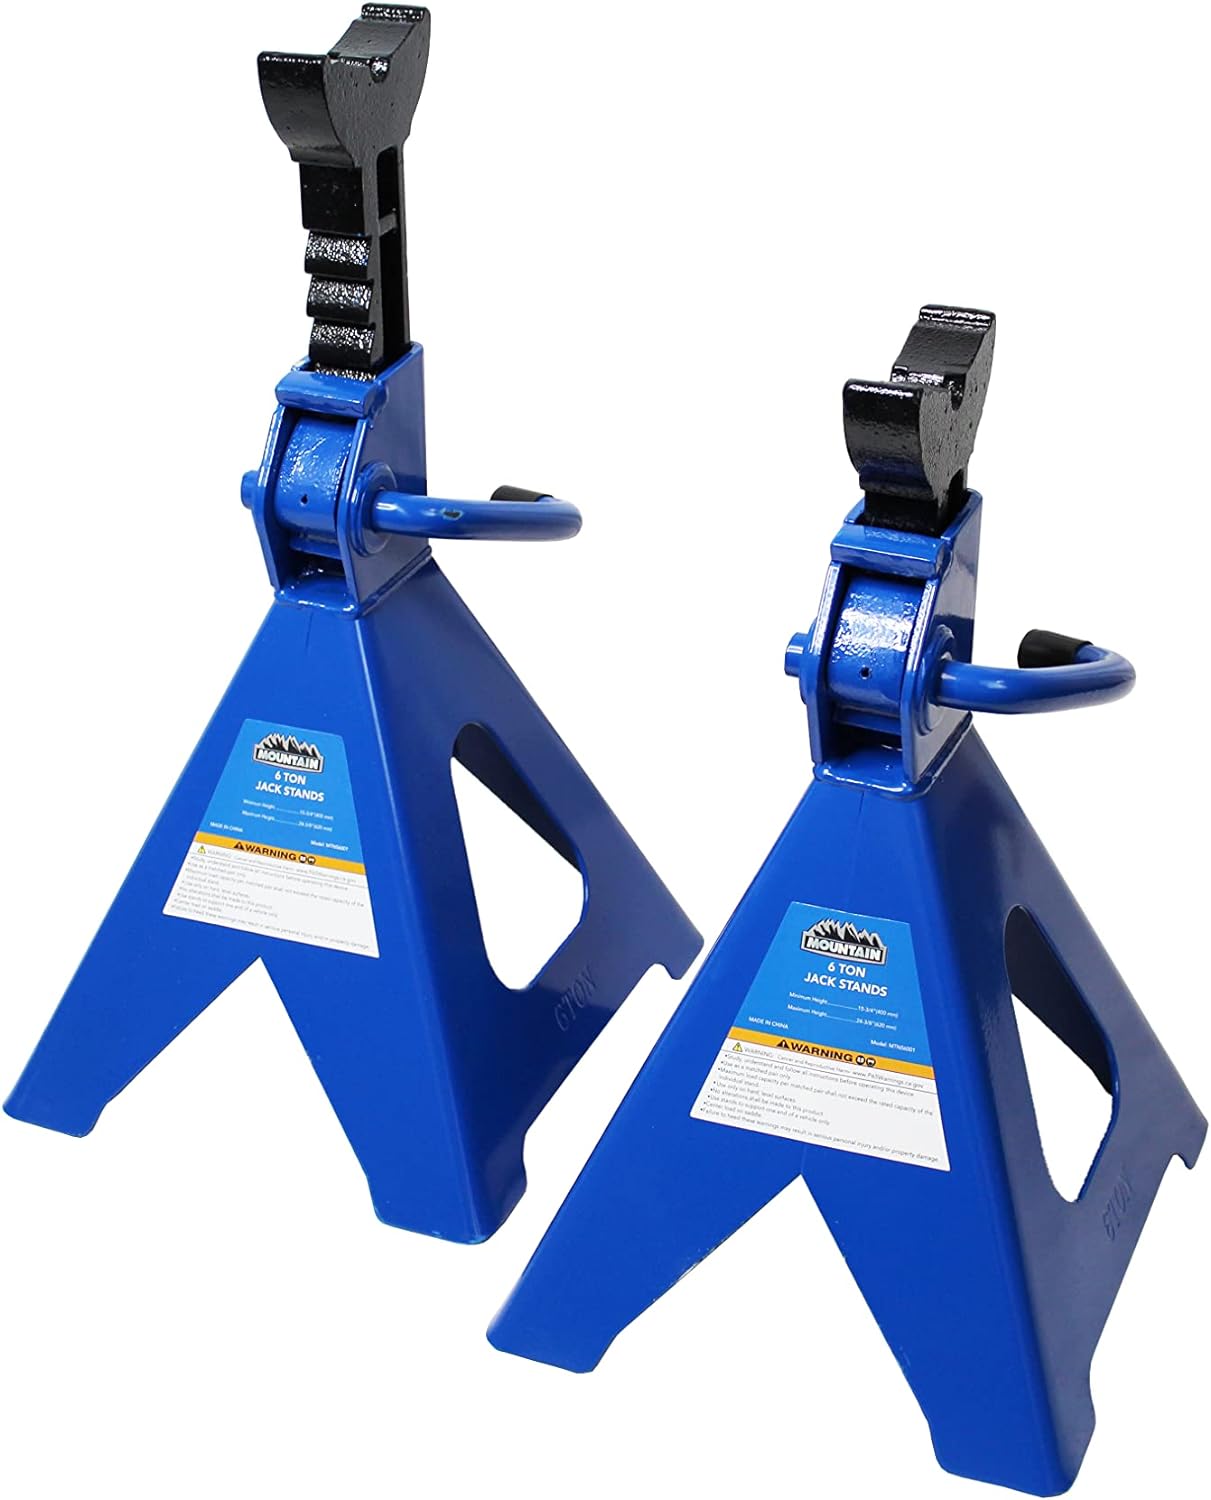 K Tool International Mountain 6 Ton Jack Stands (Pair); Heavy Duty Steel Construction, Wide Base Safety Design; MTN56001